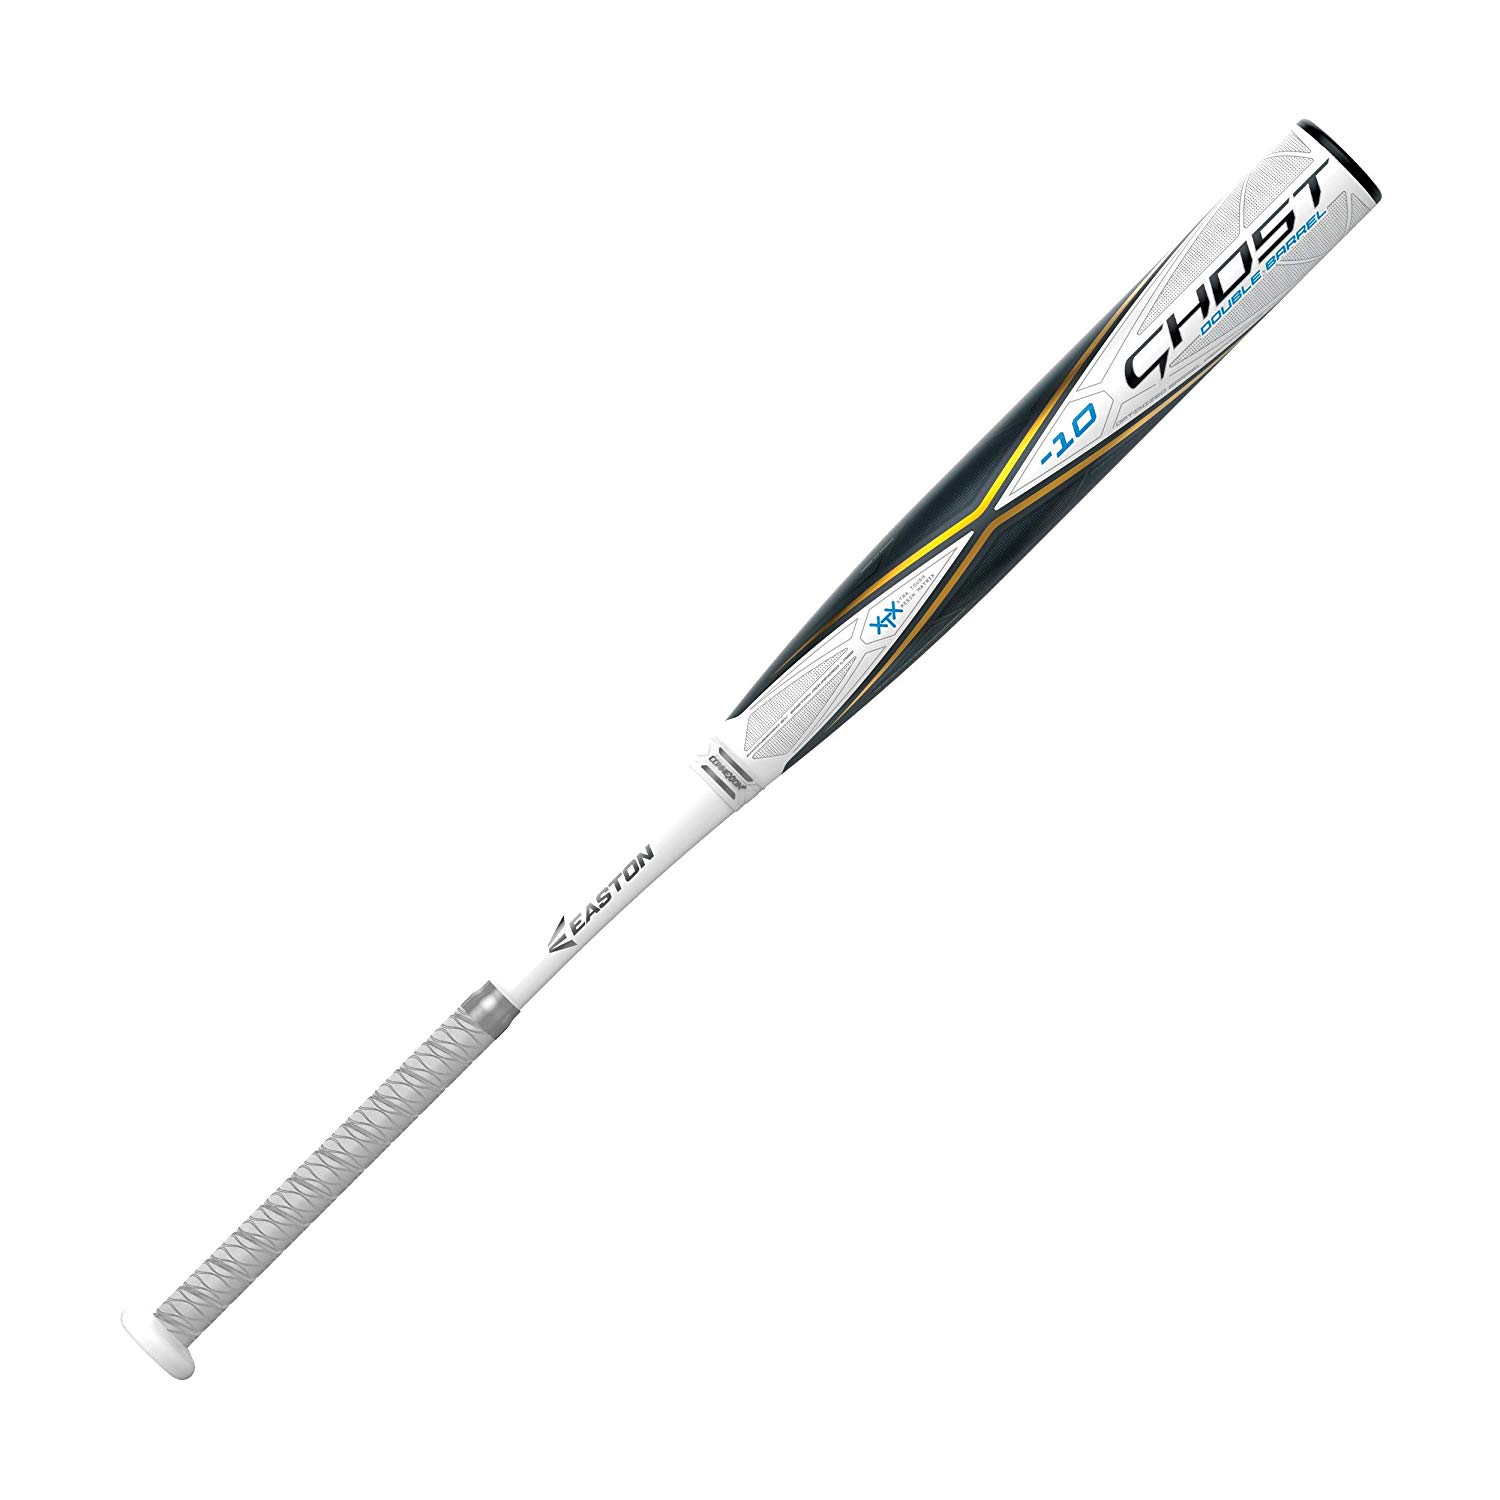 easton-ghost-10-fastpitch-softball-bat-2020-dual-stamp-33-inch-23-oz FP20GH102020-3323 Easton 628412264133 Patent-pending Double Barrel construction is the ultimate combination of feel pop